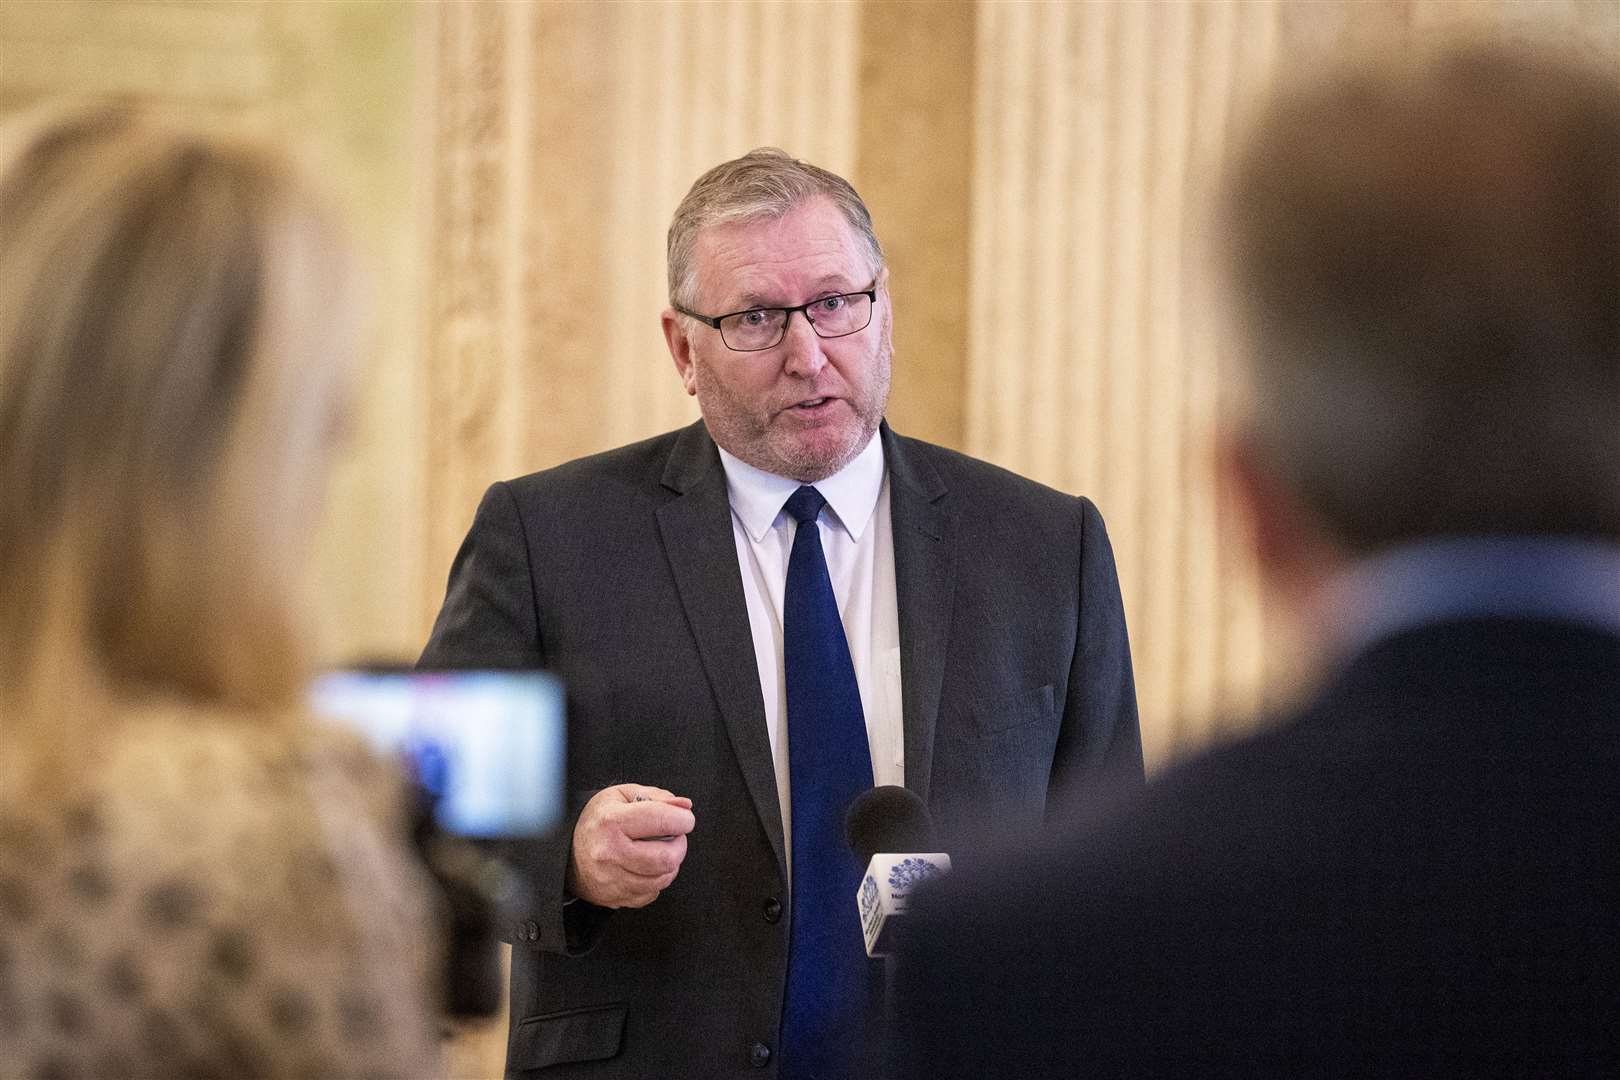 UUP leader Doug Beattie speaking to reporters at Stormont (Liam McBurney/PA)